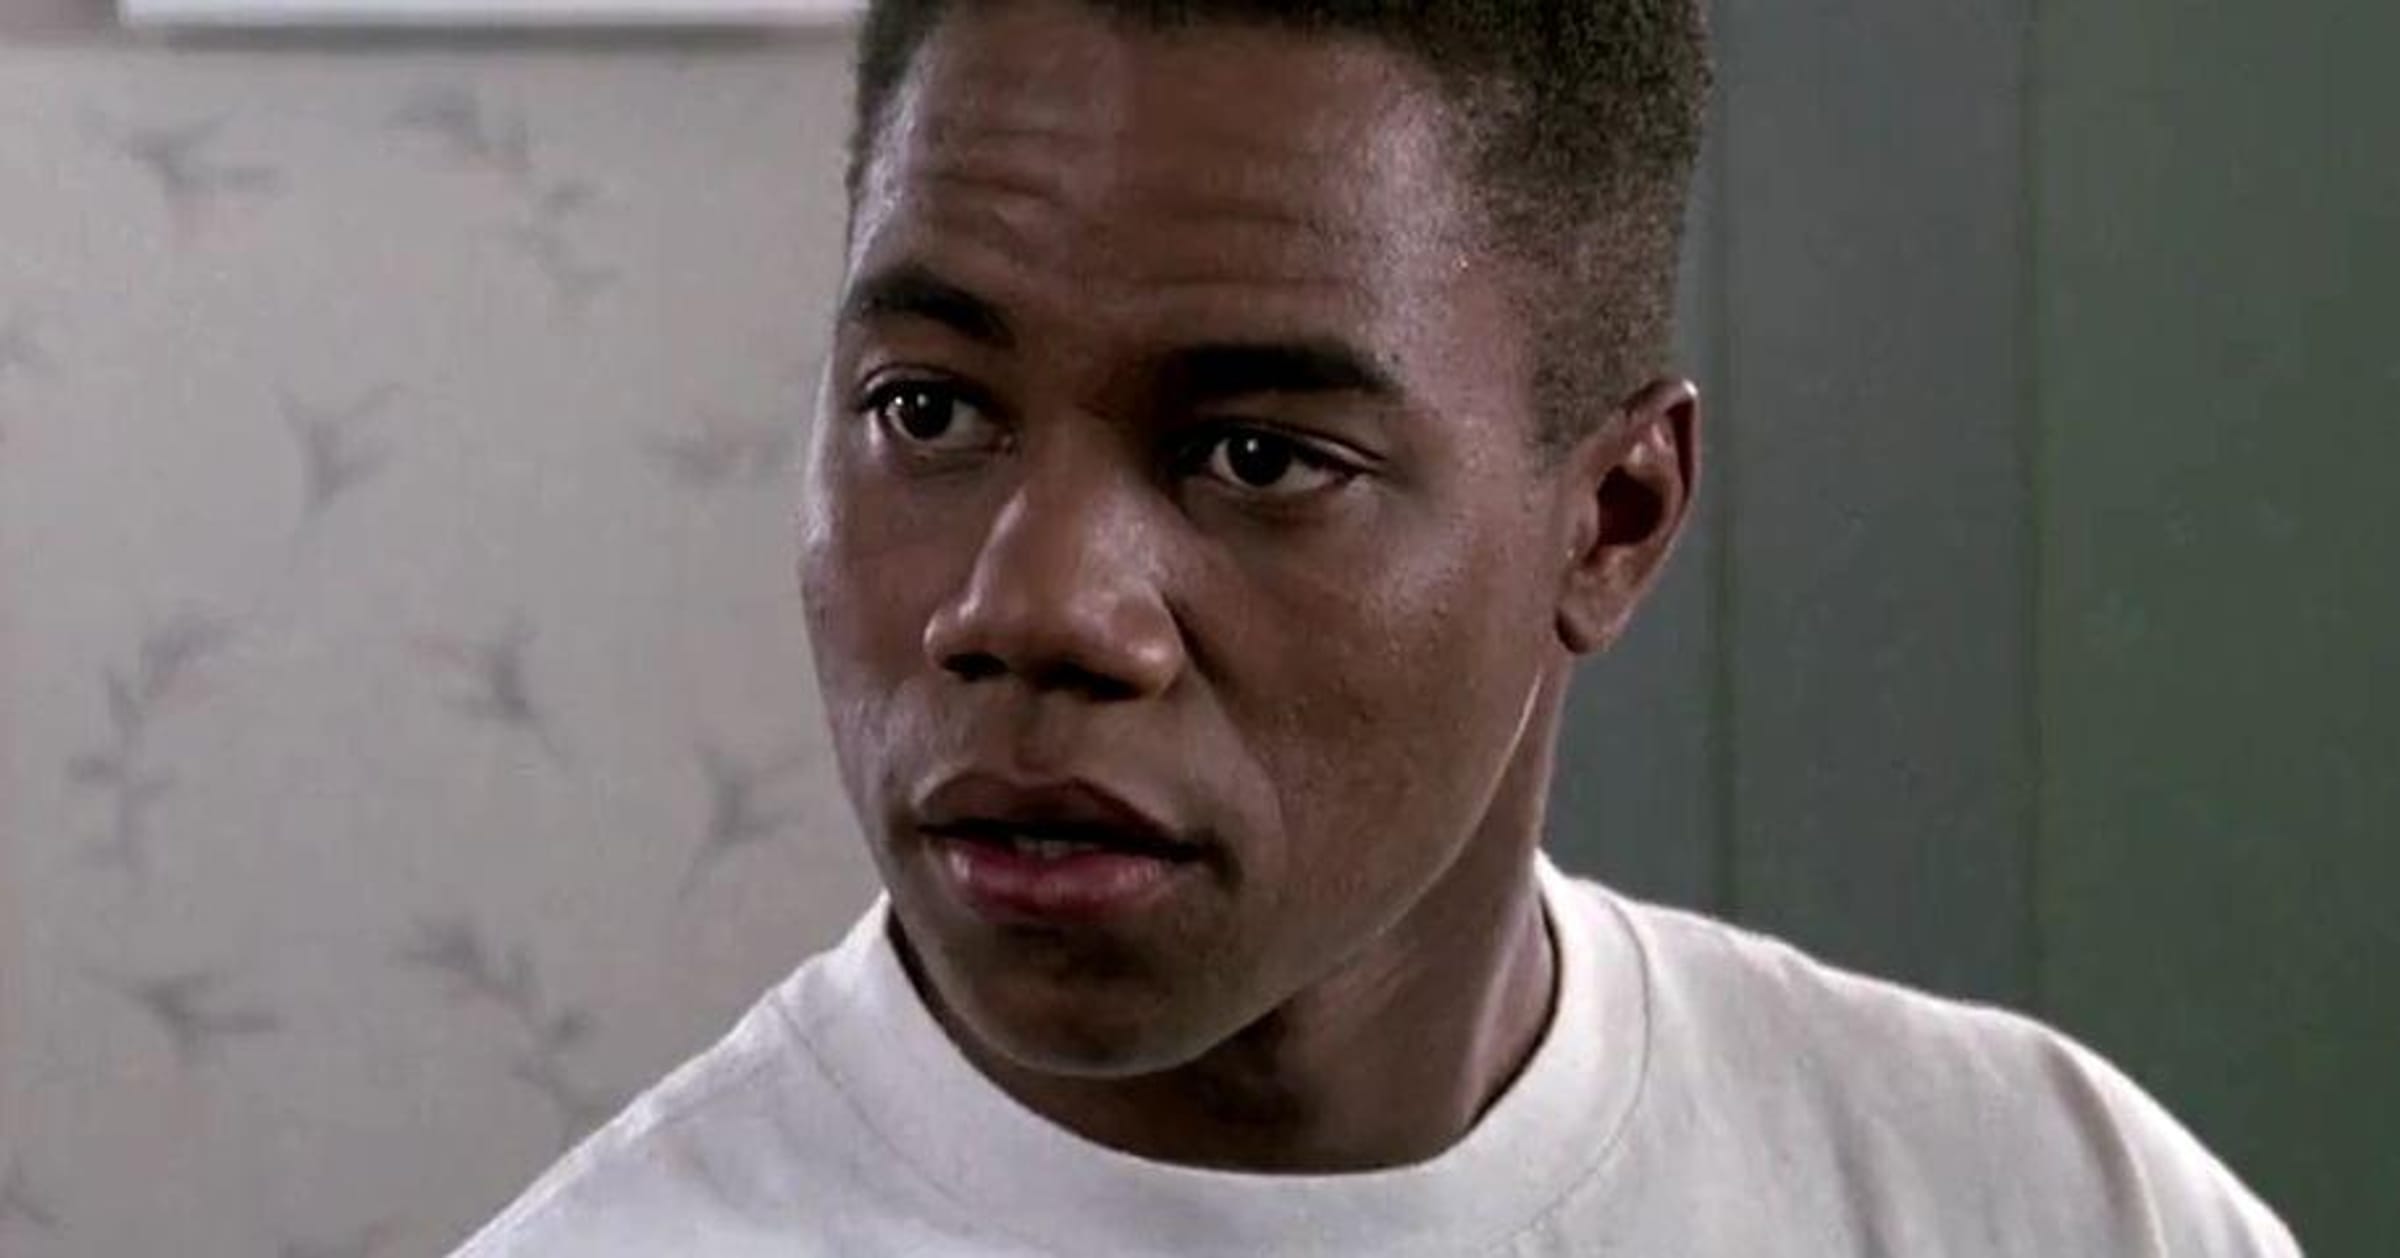 Movie Starring Cuba Gooding Jr. As Ex-Con Chess Player Due for